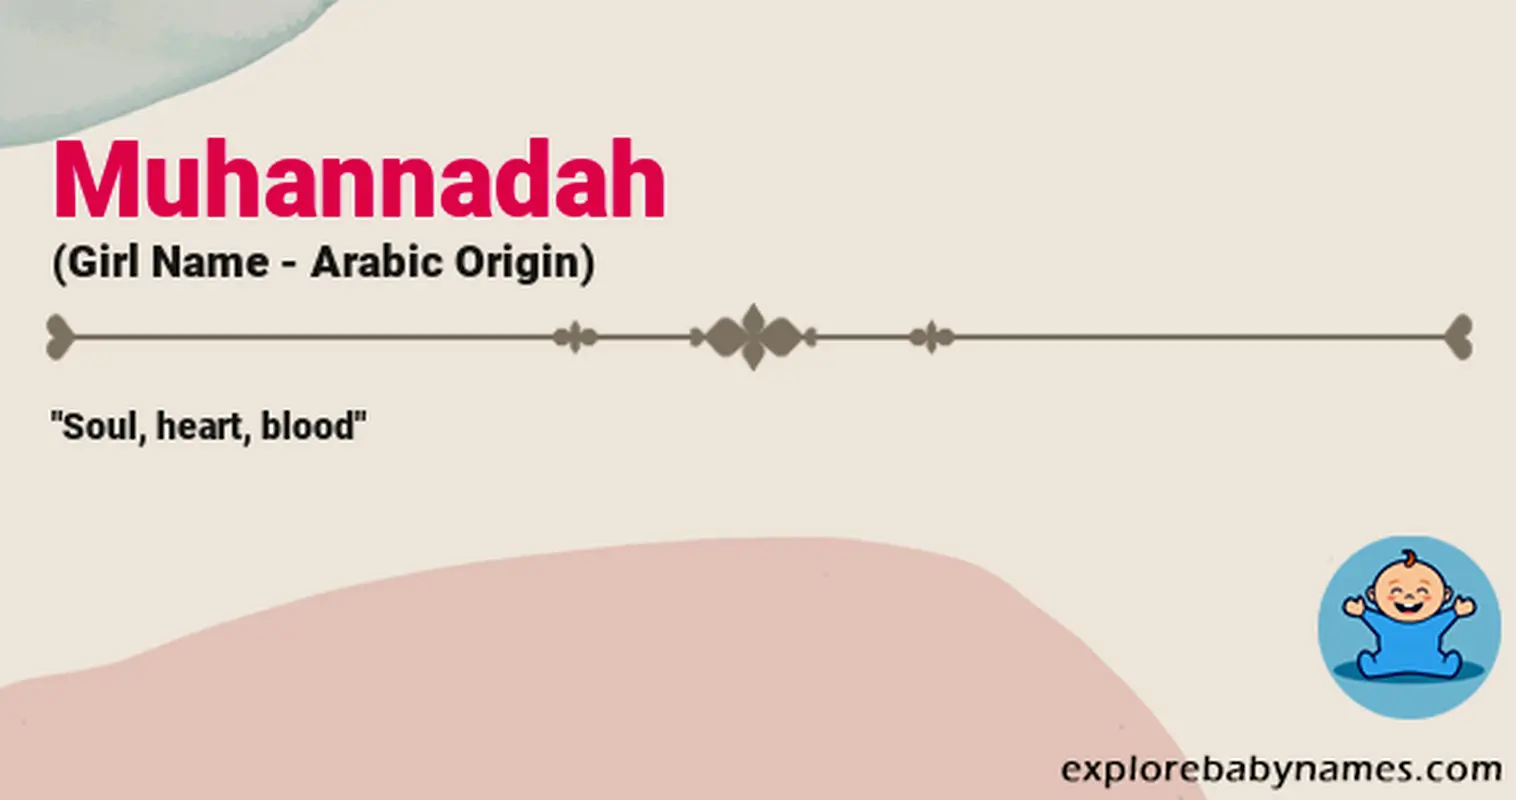 Meaning of Muhannadah